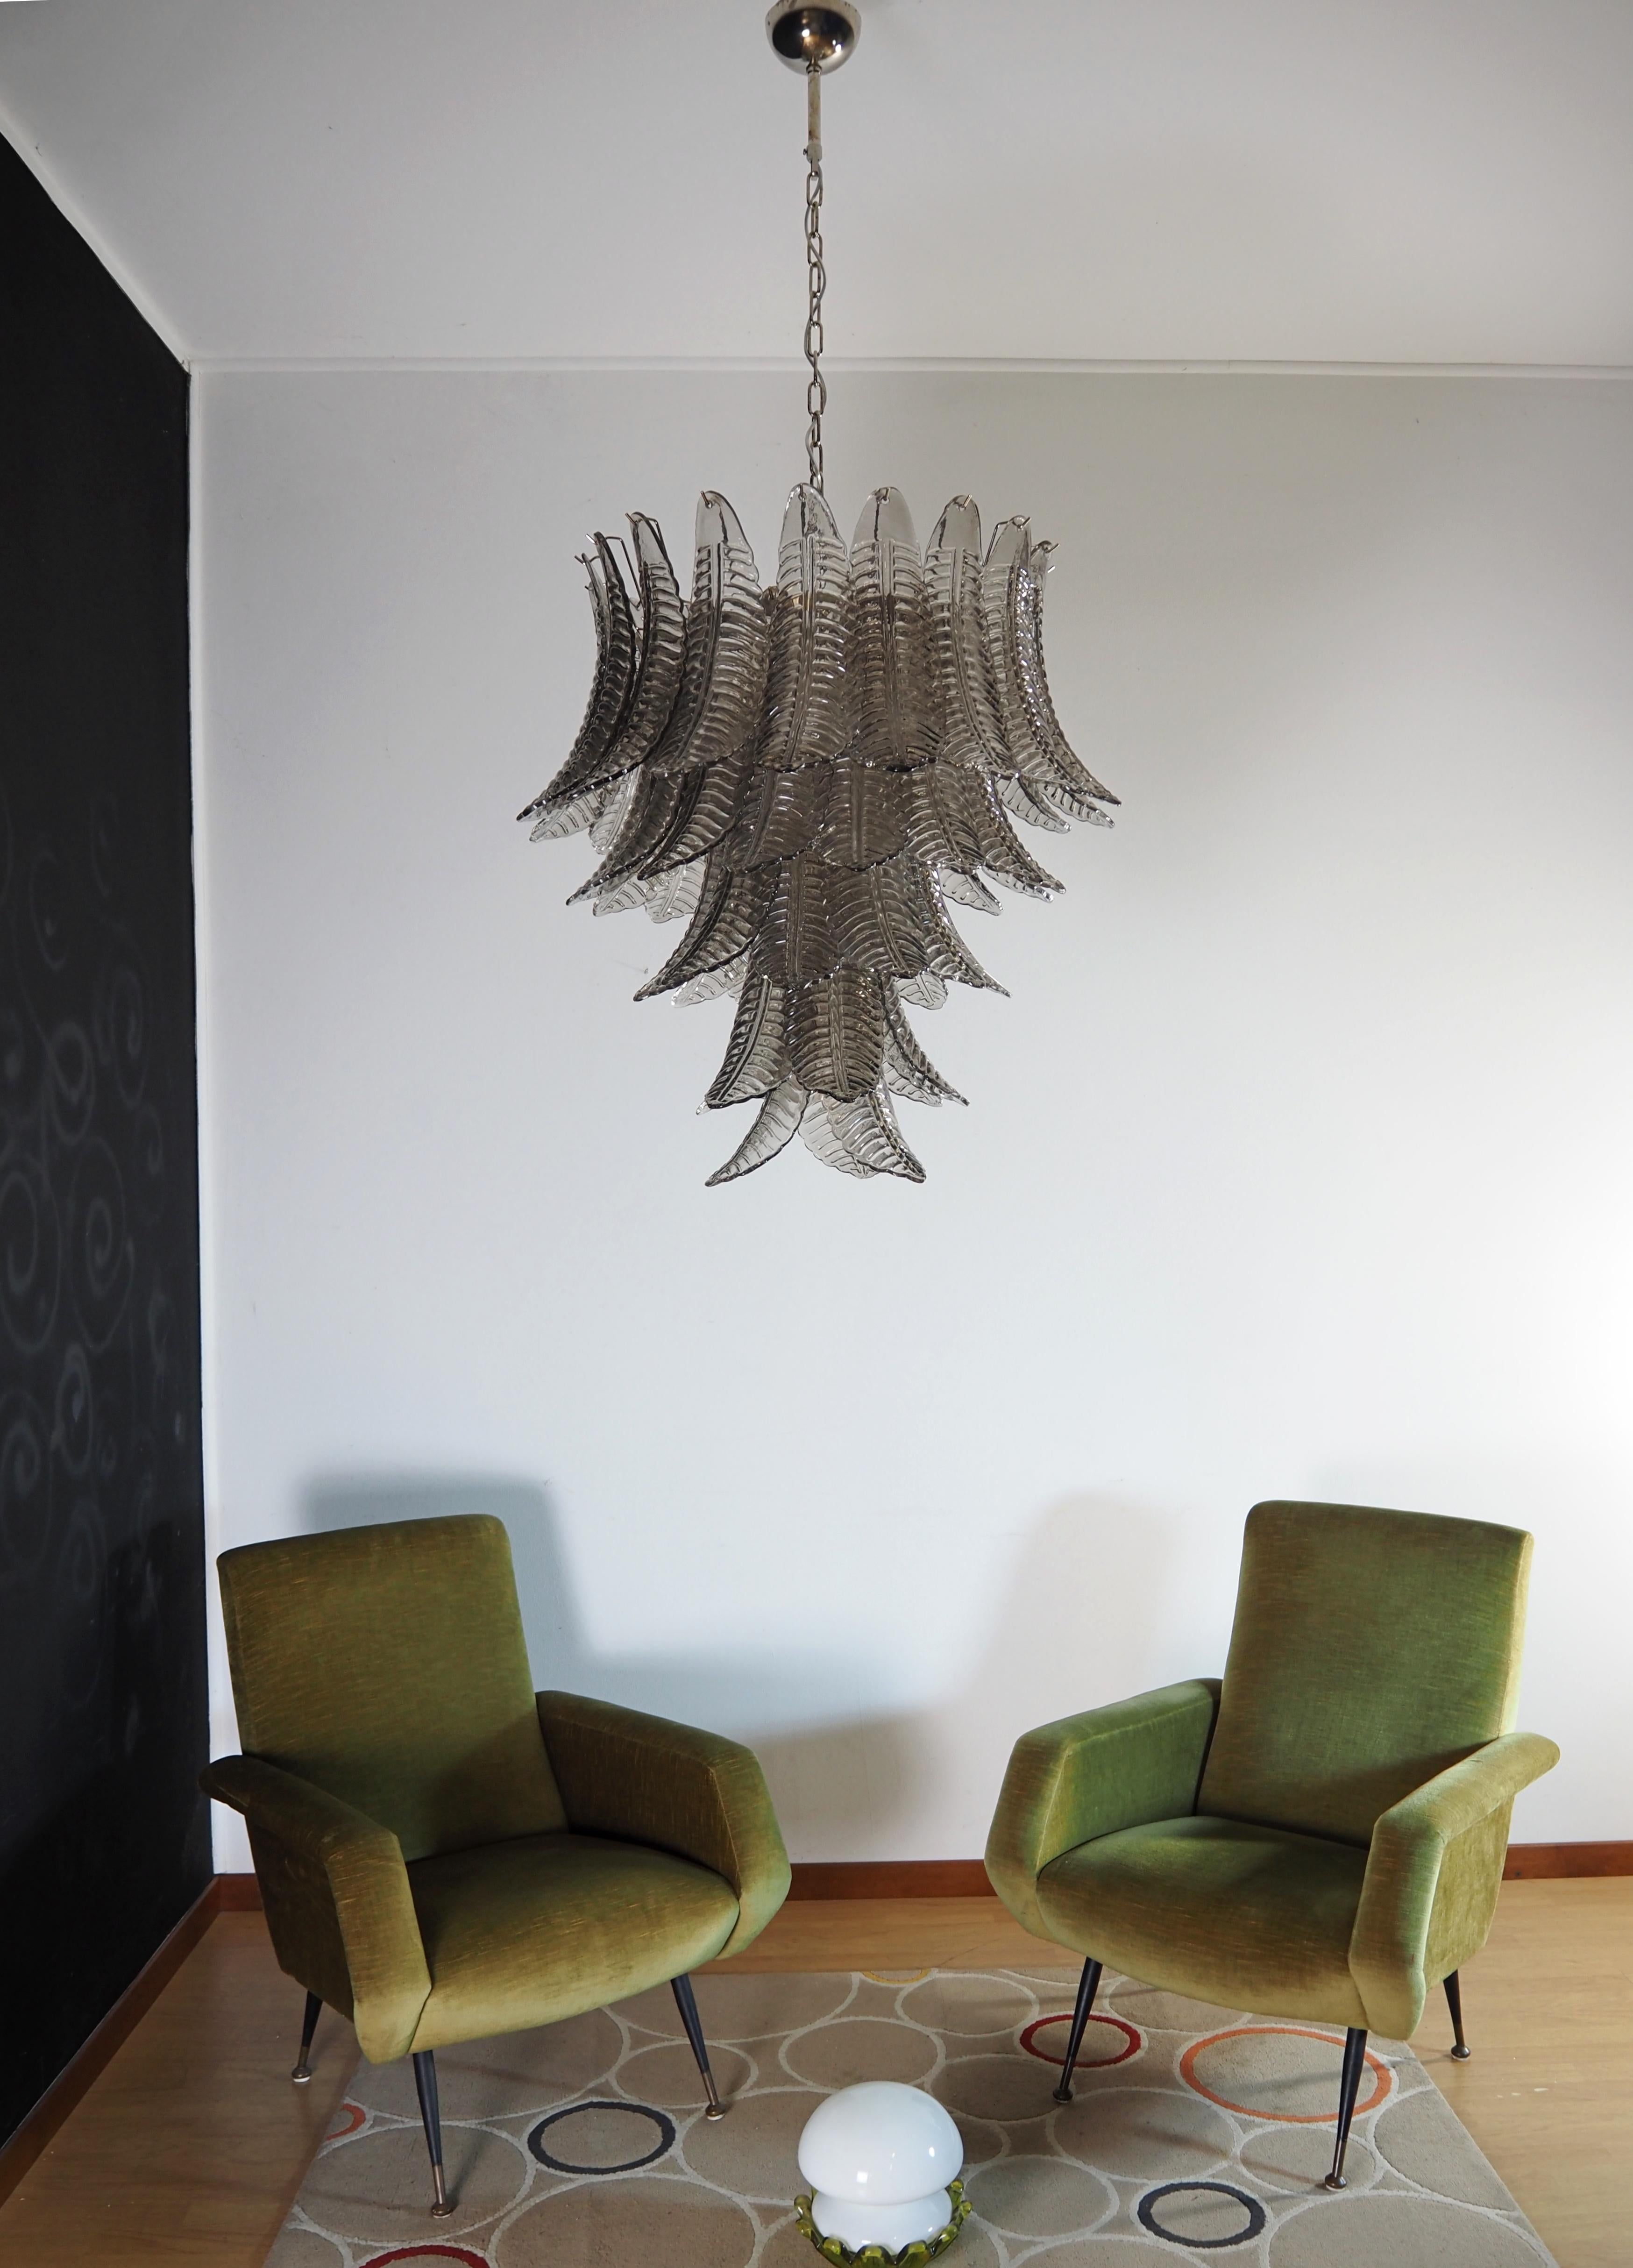 TWO - Beautiful and huge Italian Murano Chandelier composed of 52 splendid smoked glasses that give a very elegant look. The glasses of this chandelier are real works of art, the weight of this chandelier is 40 kg.
Period: late XX